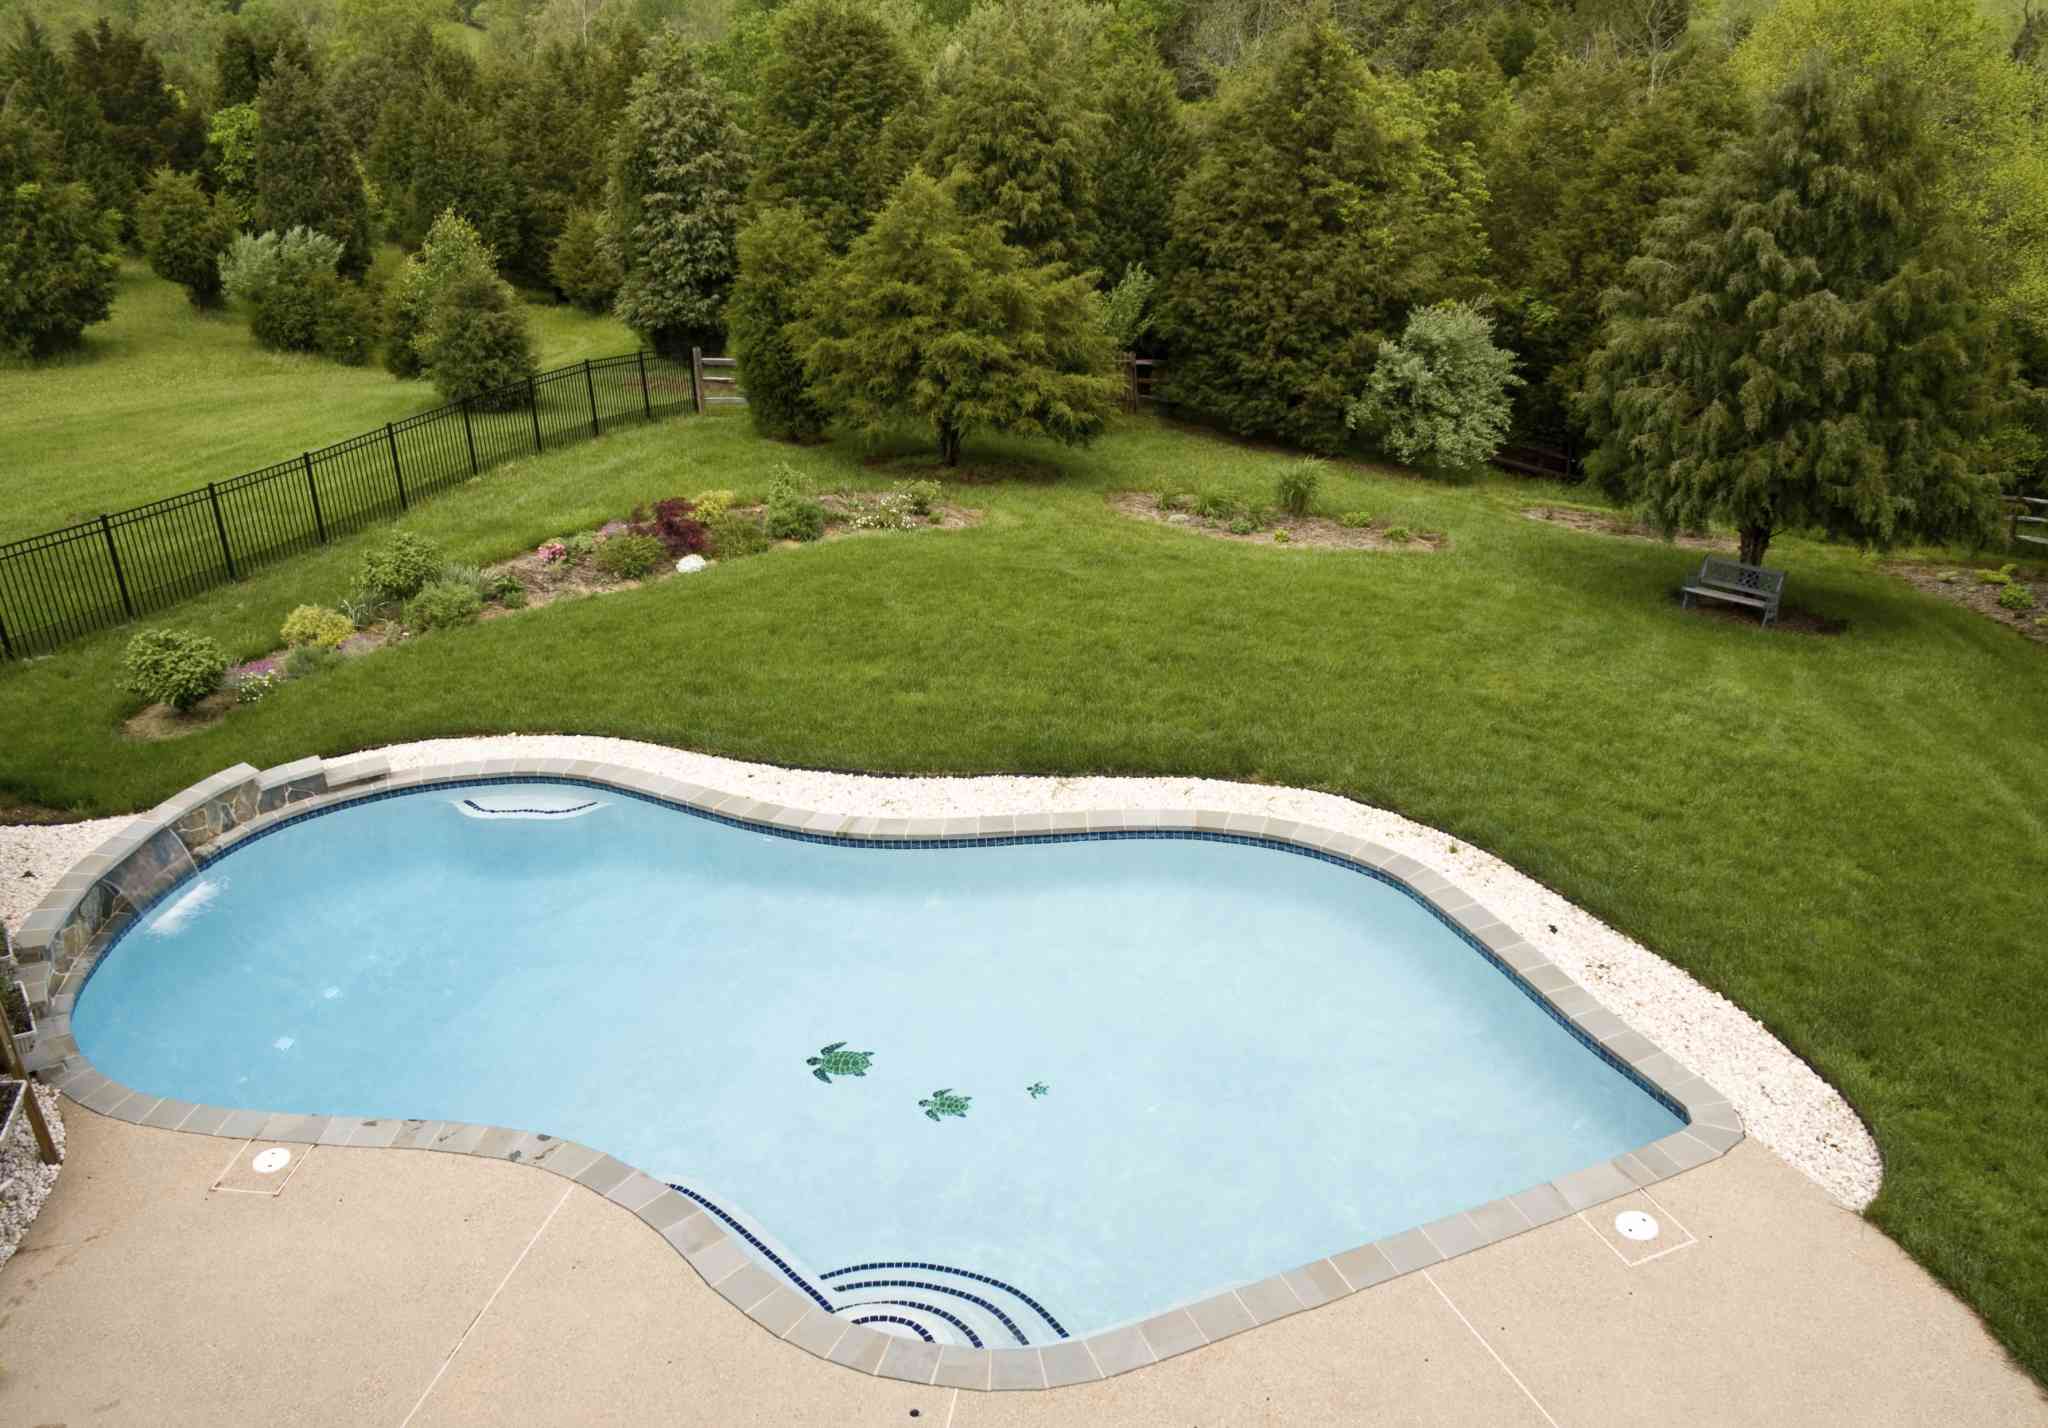 3 Reasons Why Fall Is An Excellent Time Of The Year To Purchase A Swimming Pool